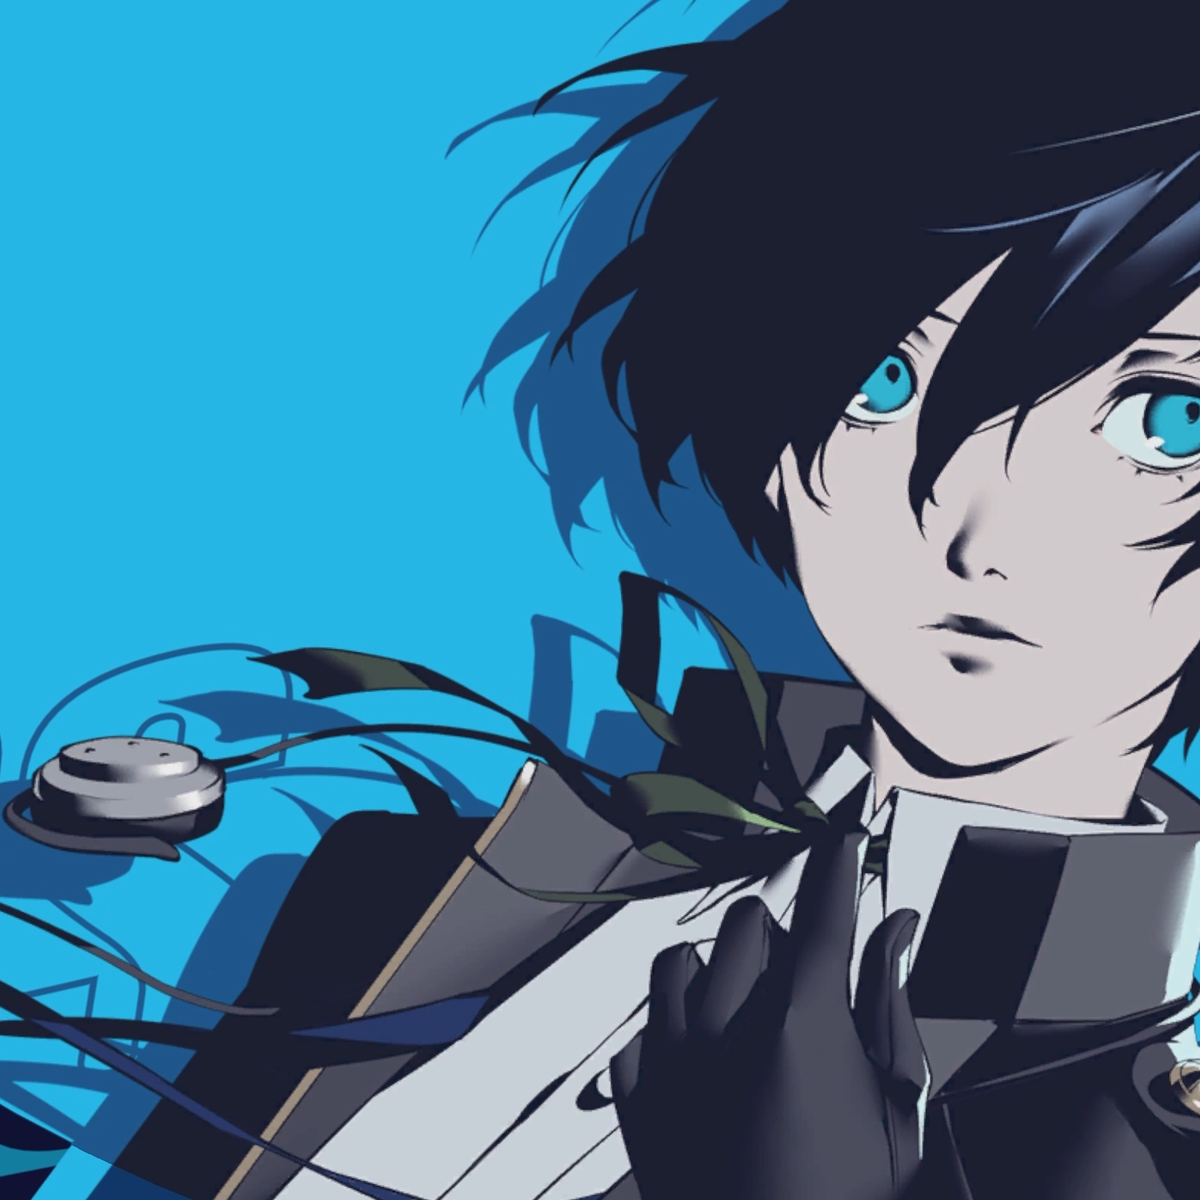  Persona 3 Reload Hintergrundbild 1200x1200. Persona 3 Reload builds on fine foundations, but may fall just short of definitive